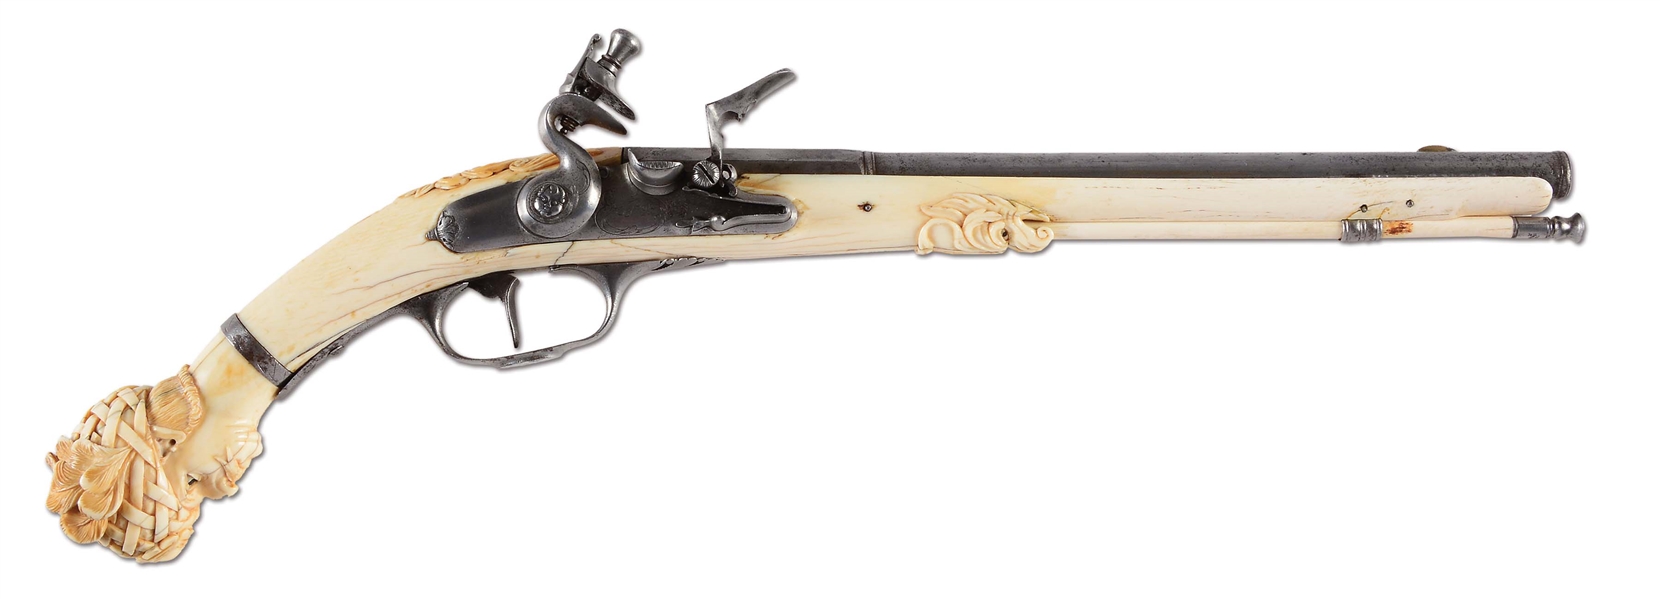 (A) AN EXTREMELY RARE AND MAGNIFICENT DUTCH IVORY STOCK FLINTLOCK PISTOL, MAASTRICHT CIRCA 1675 WITH EXQUISITELY CARVED TURK’S HEAD POMMEL.